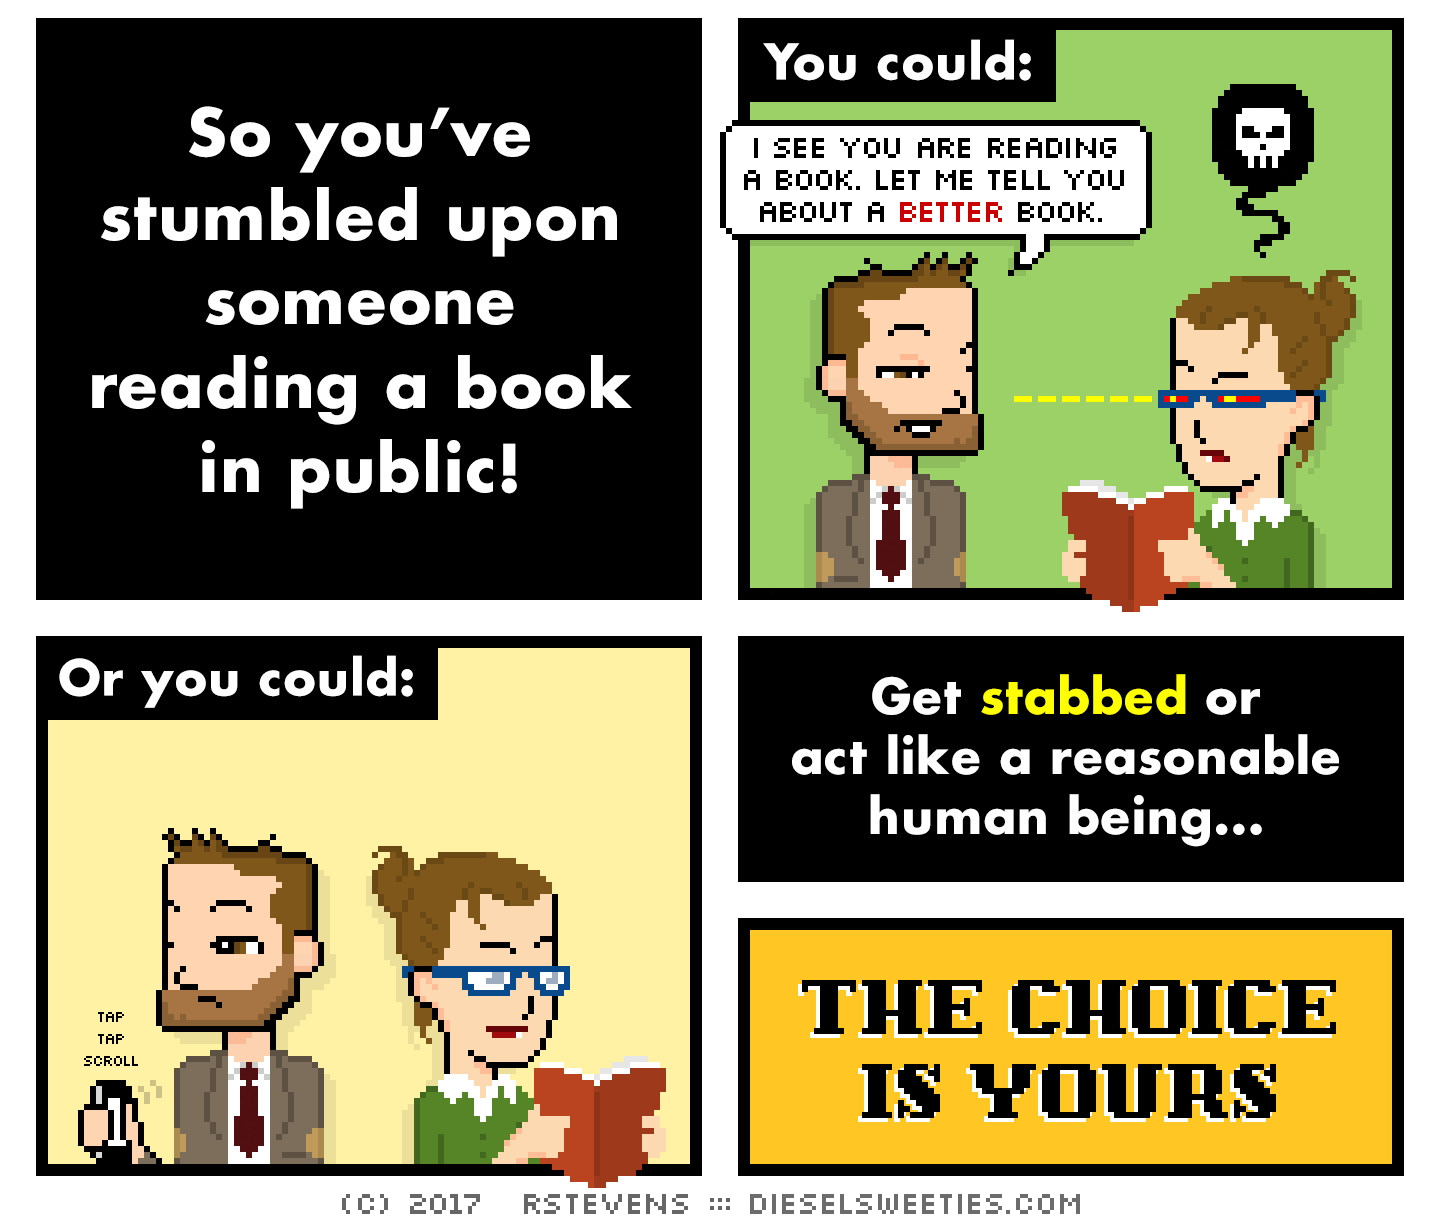 indie rock pete, library anne, holding book : So you’ve stumbled upon someone reading a book in public! You could: i see you are reading a book. let me tell you about a better book. Or you could: tap tap scroll : Get stabbed or act like a reasonable human being... THE CHOICE IS YOURS